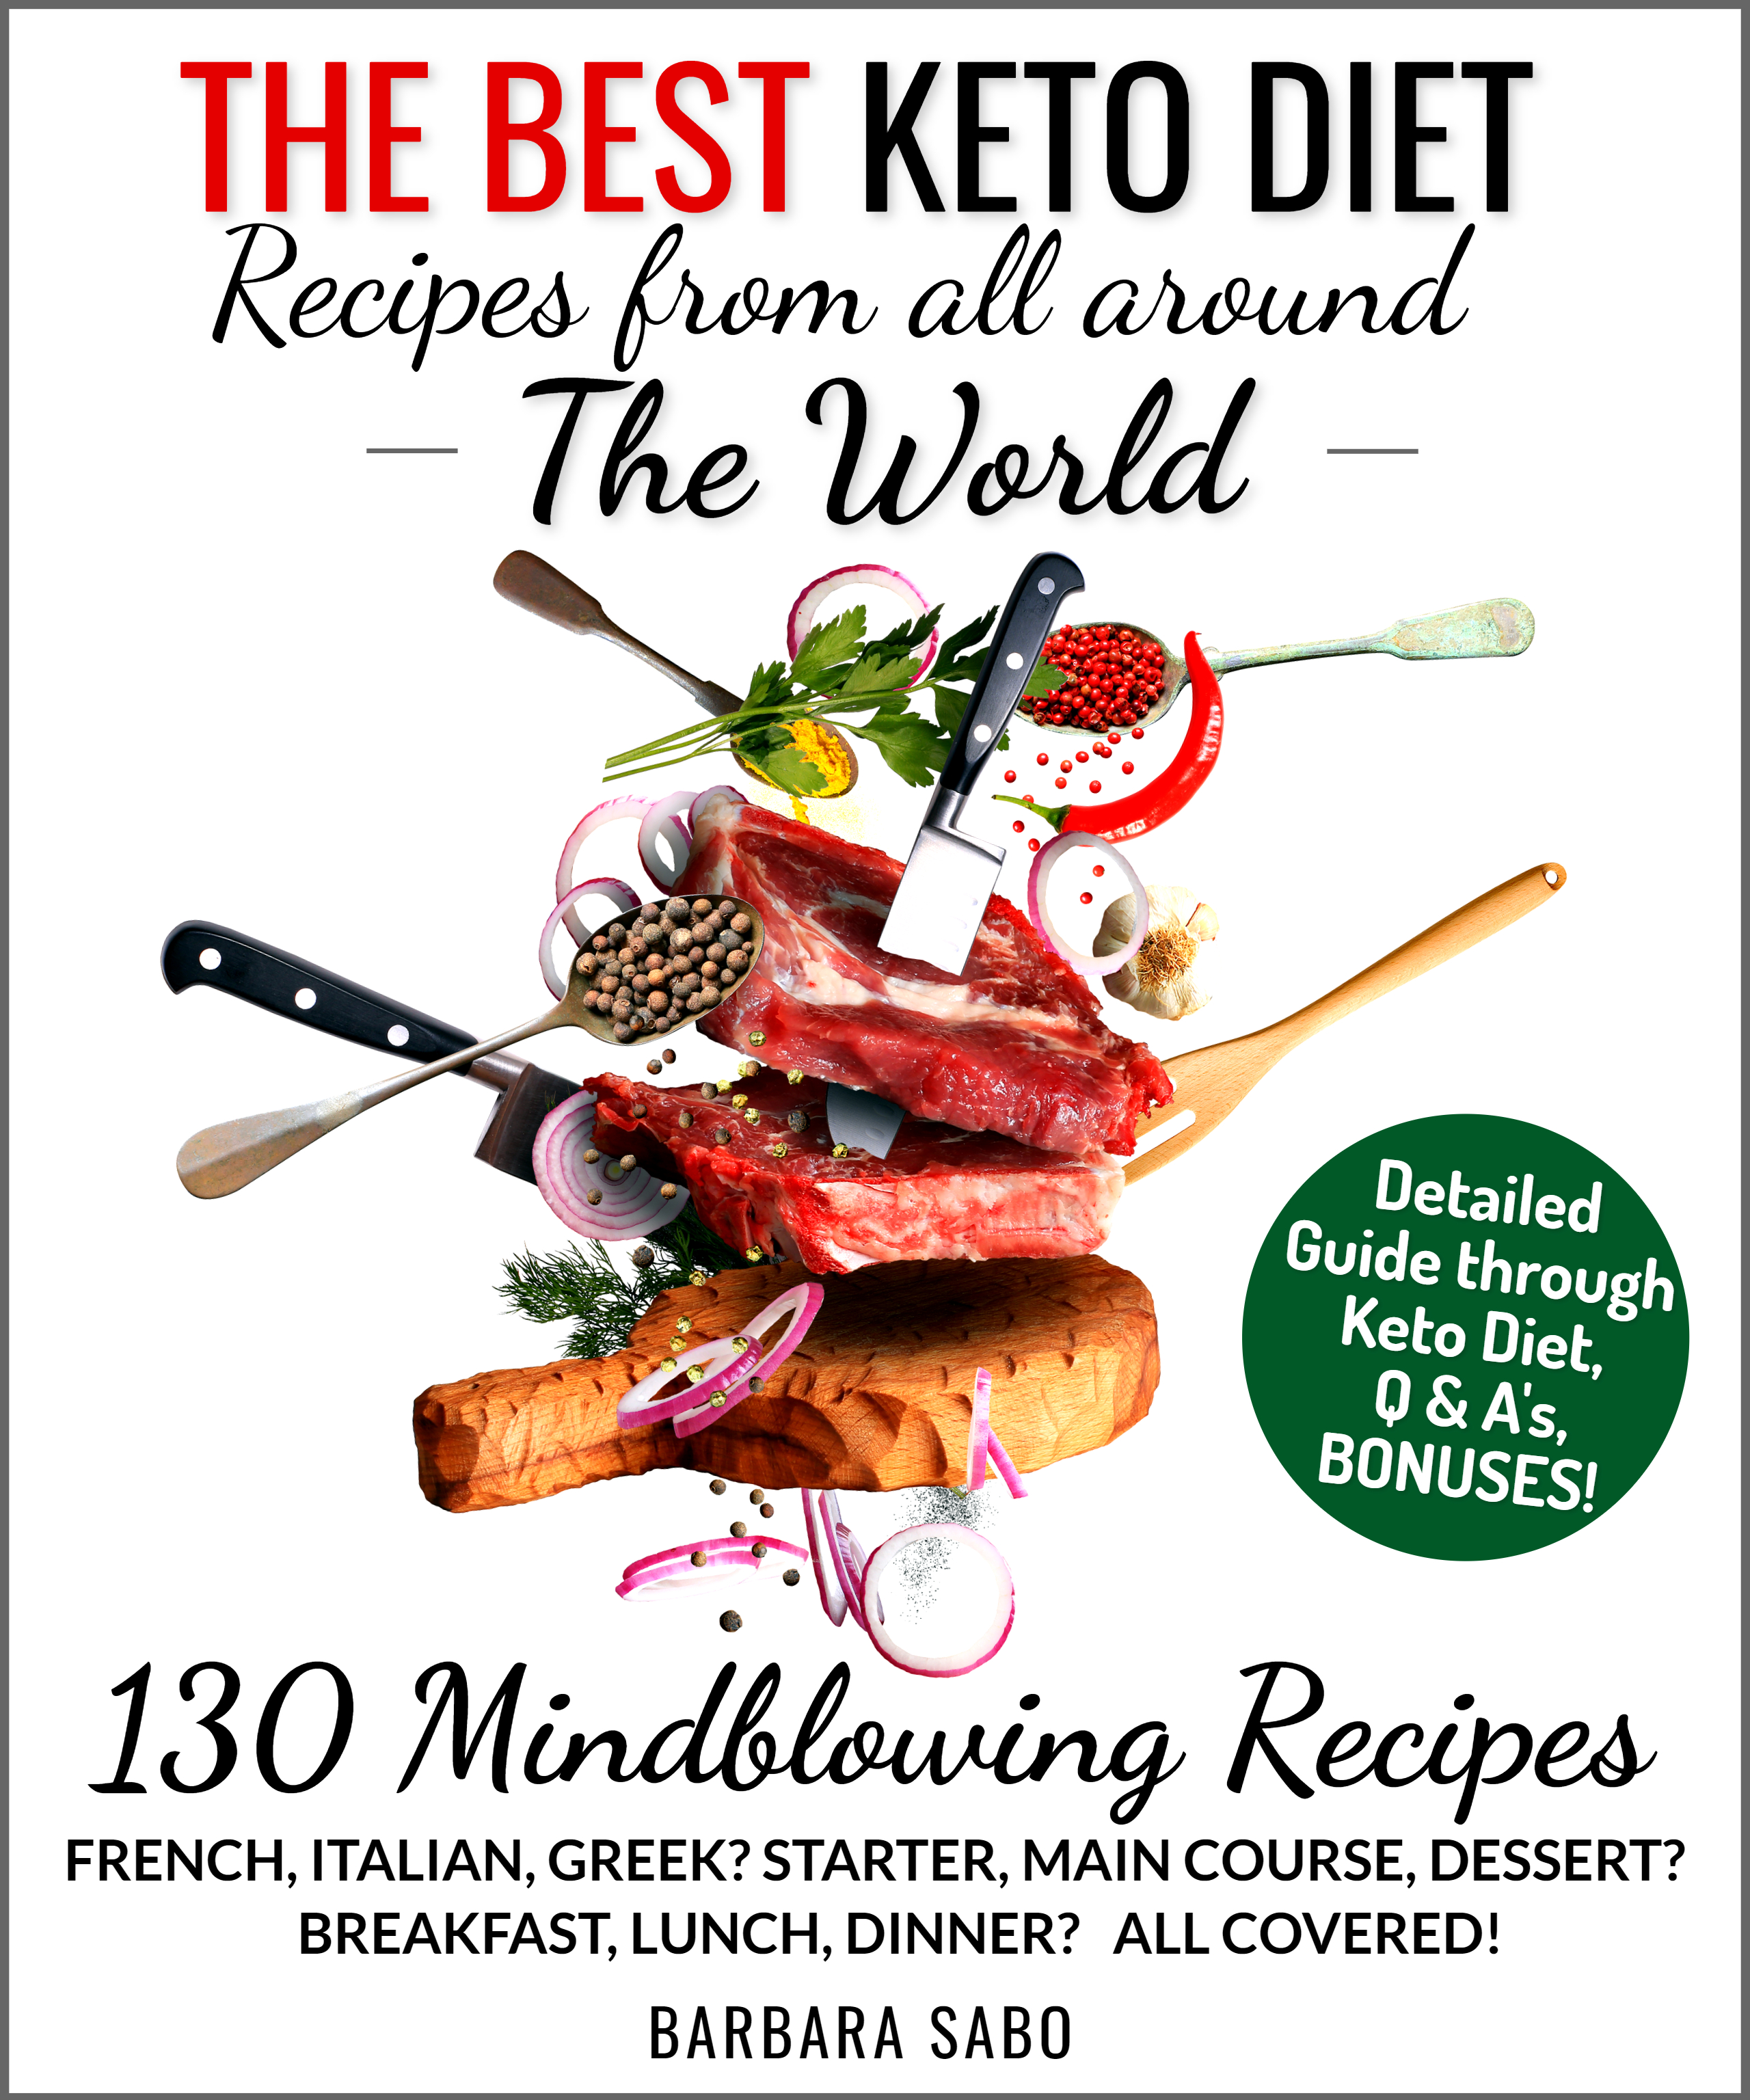 FREE: The Best Keto Diet Recipes from all around the World: Your Complete Guide for High Fat Diet – More than 130 recipes, 21 days of Keto Specific Goals + BONUS Aldi & Walmart Shopping List by Barbara Sabo